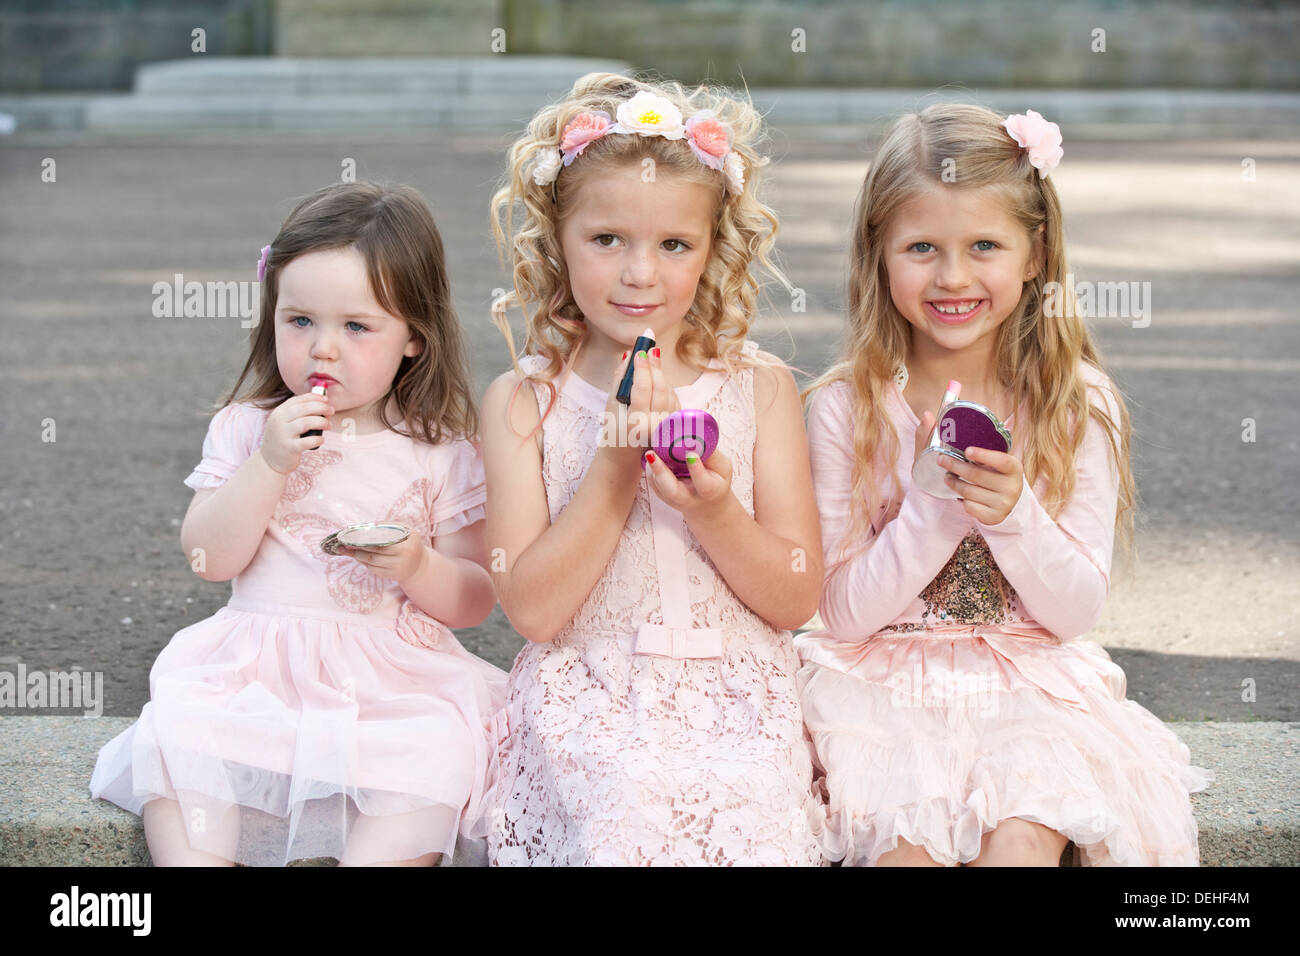 Three young preteen girls wearing pink dresses and applying make up. Stock Photo